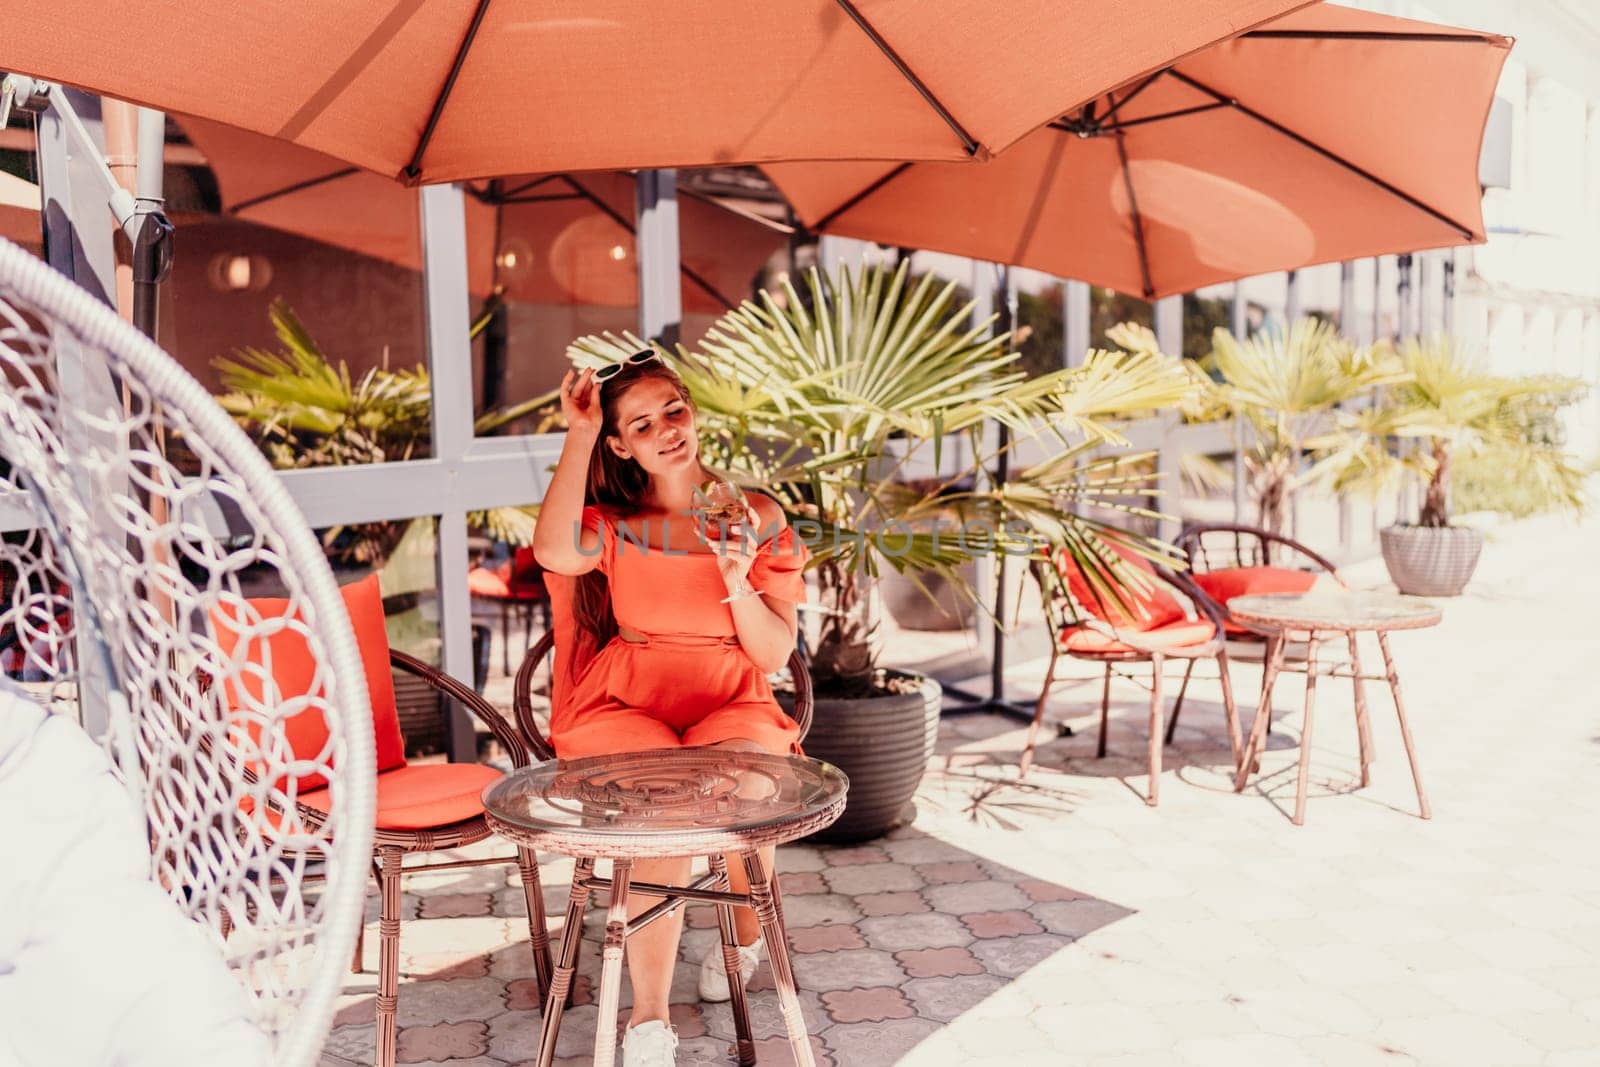 A woman in an orange dress sits at a table with a drink in a glass. The scene is set in a restaurant or cafe, with a potted plant nearby. The woman is enjoying her time, and the atmosphere is relaxed. by Matiunina